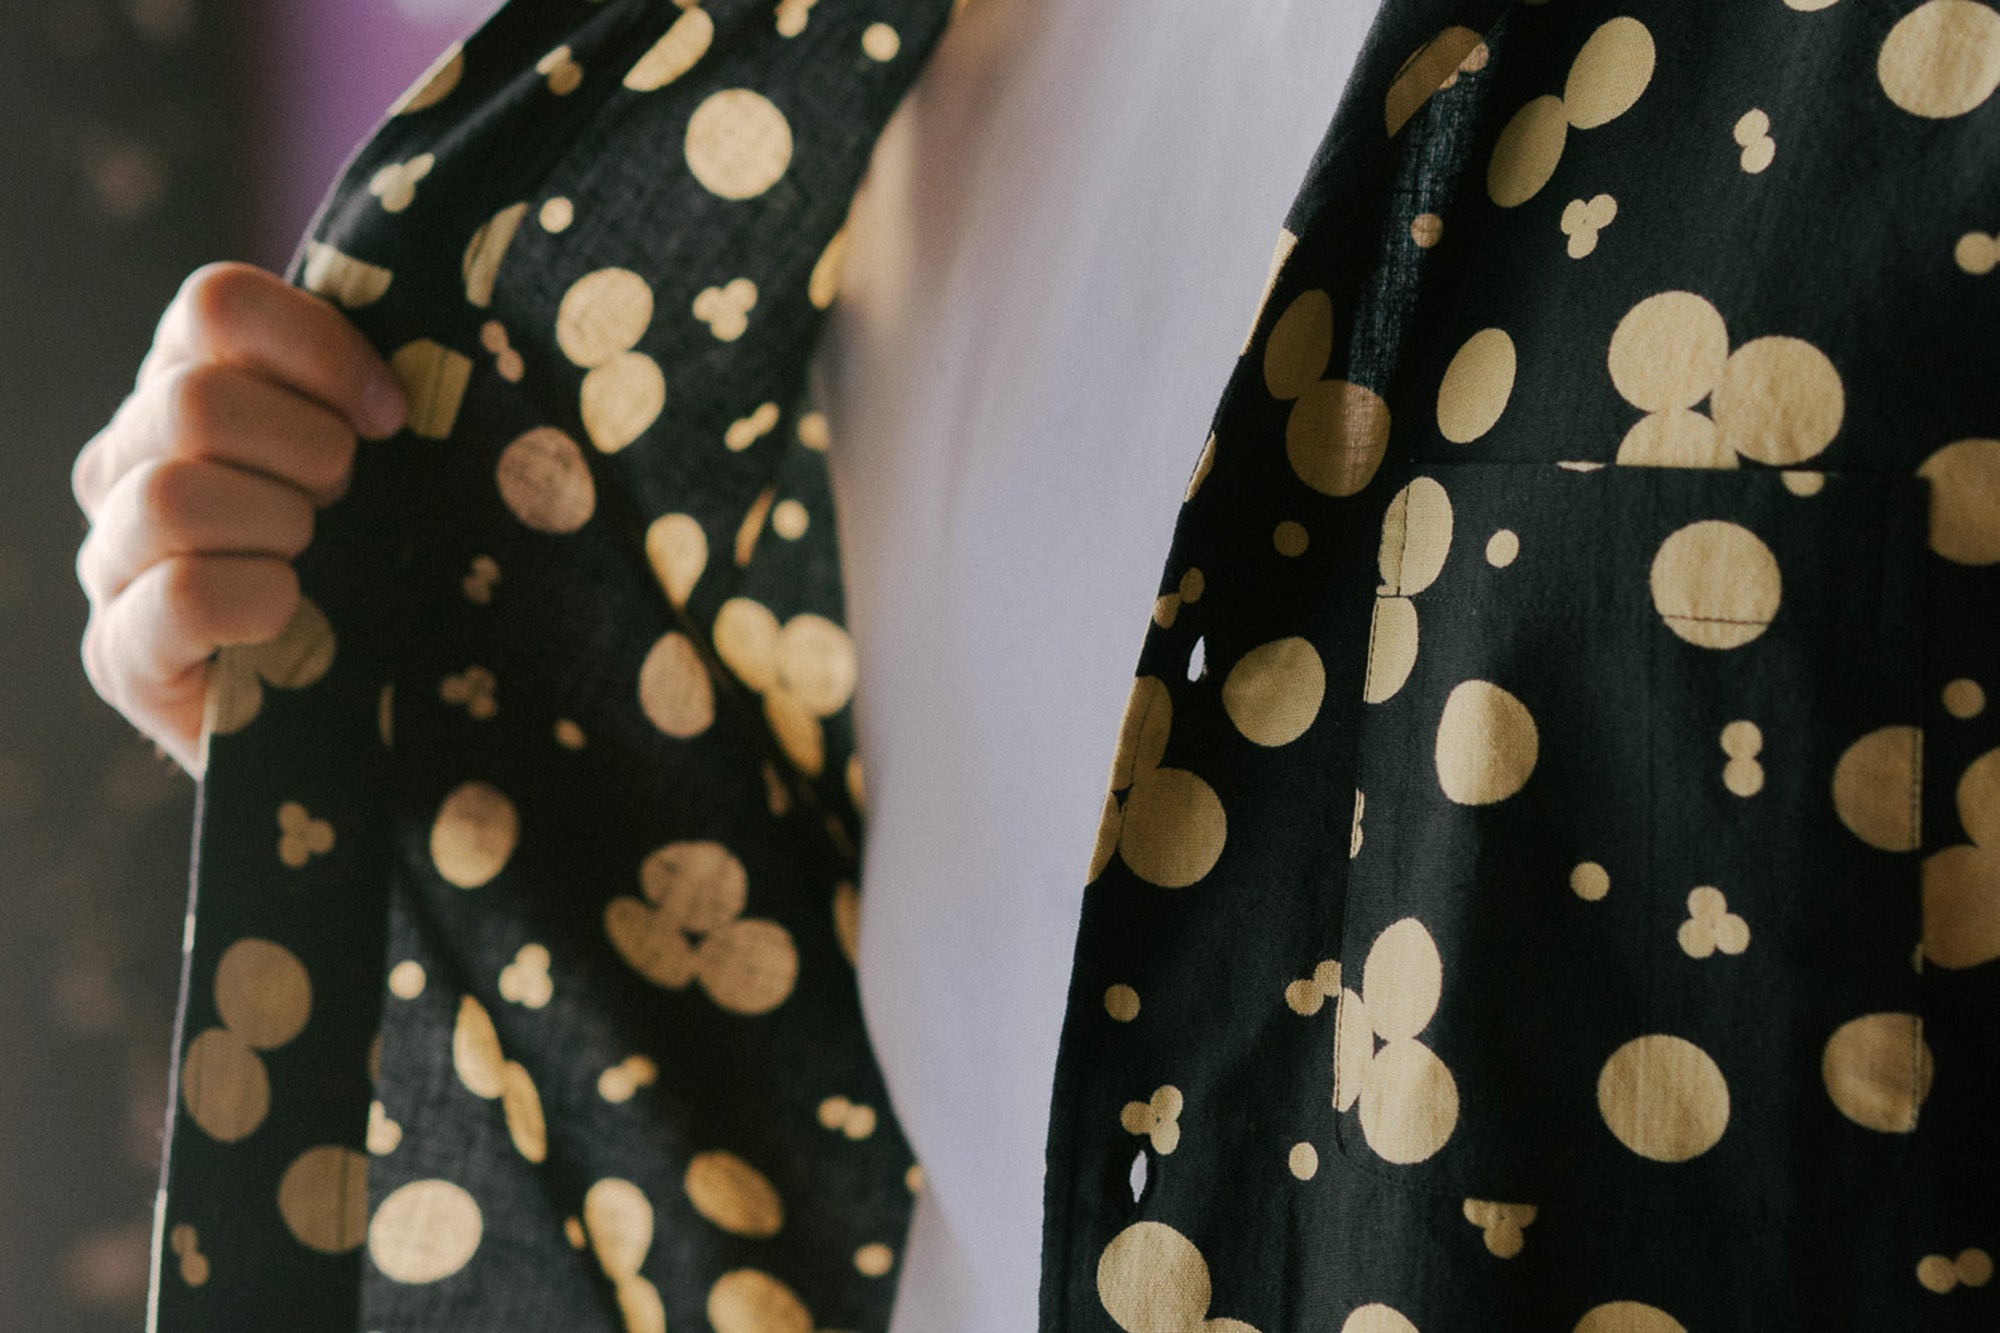 A close up image of a black shirt with a cream pattern printed on.